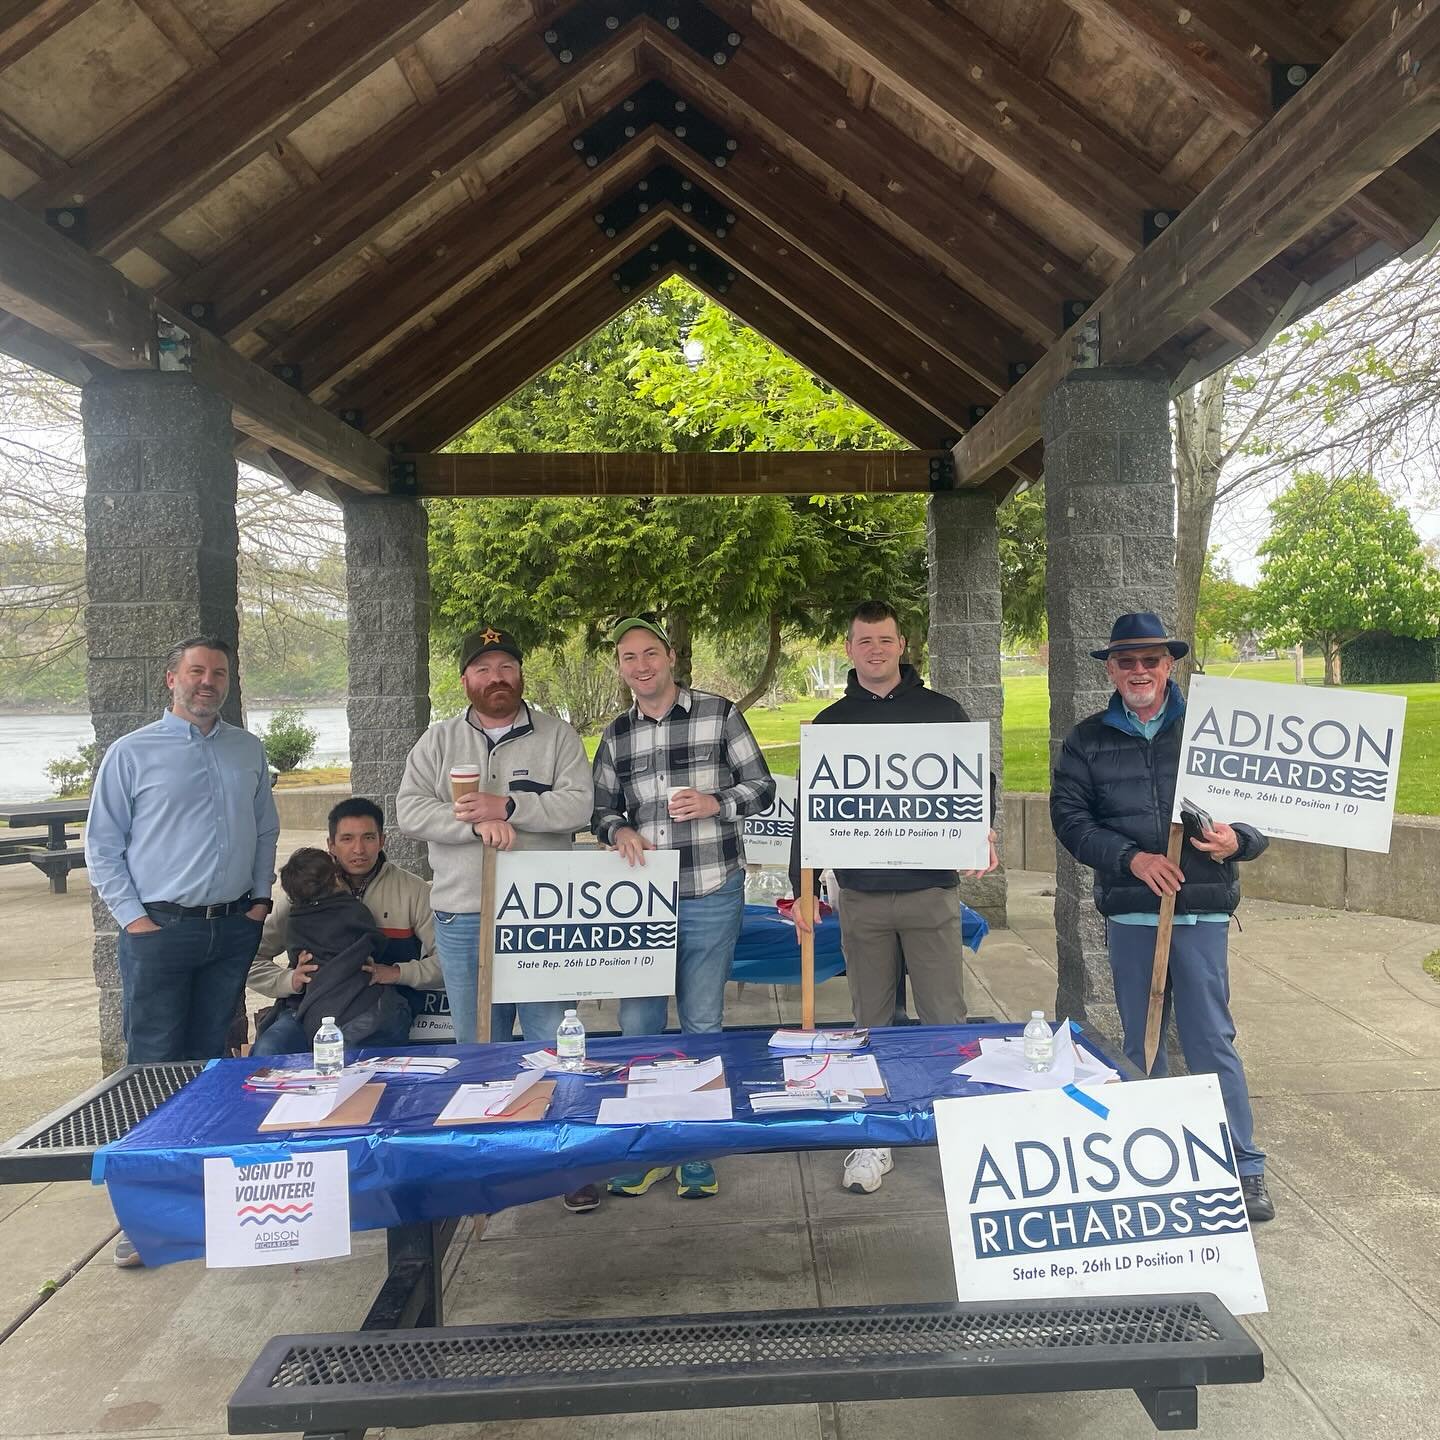 Kicked off a canvass in Bremerton, knocked on doors in Port Orchard, and spoke with the @youngdemskitsappen at the Gig Harbor Library. Also picked up some new books at @invitationbookshop on this Independent Bookstore Day!

We were all over the 26th 